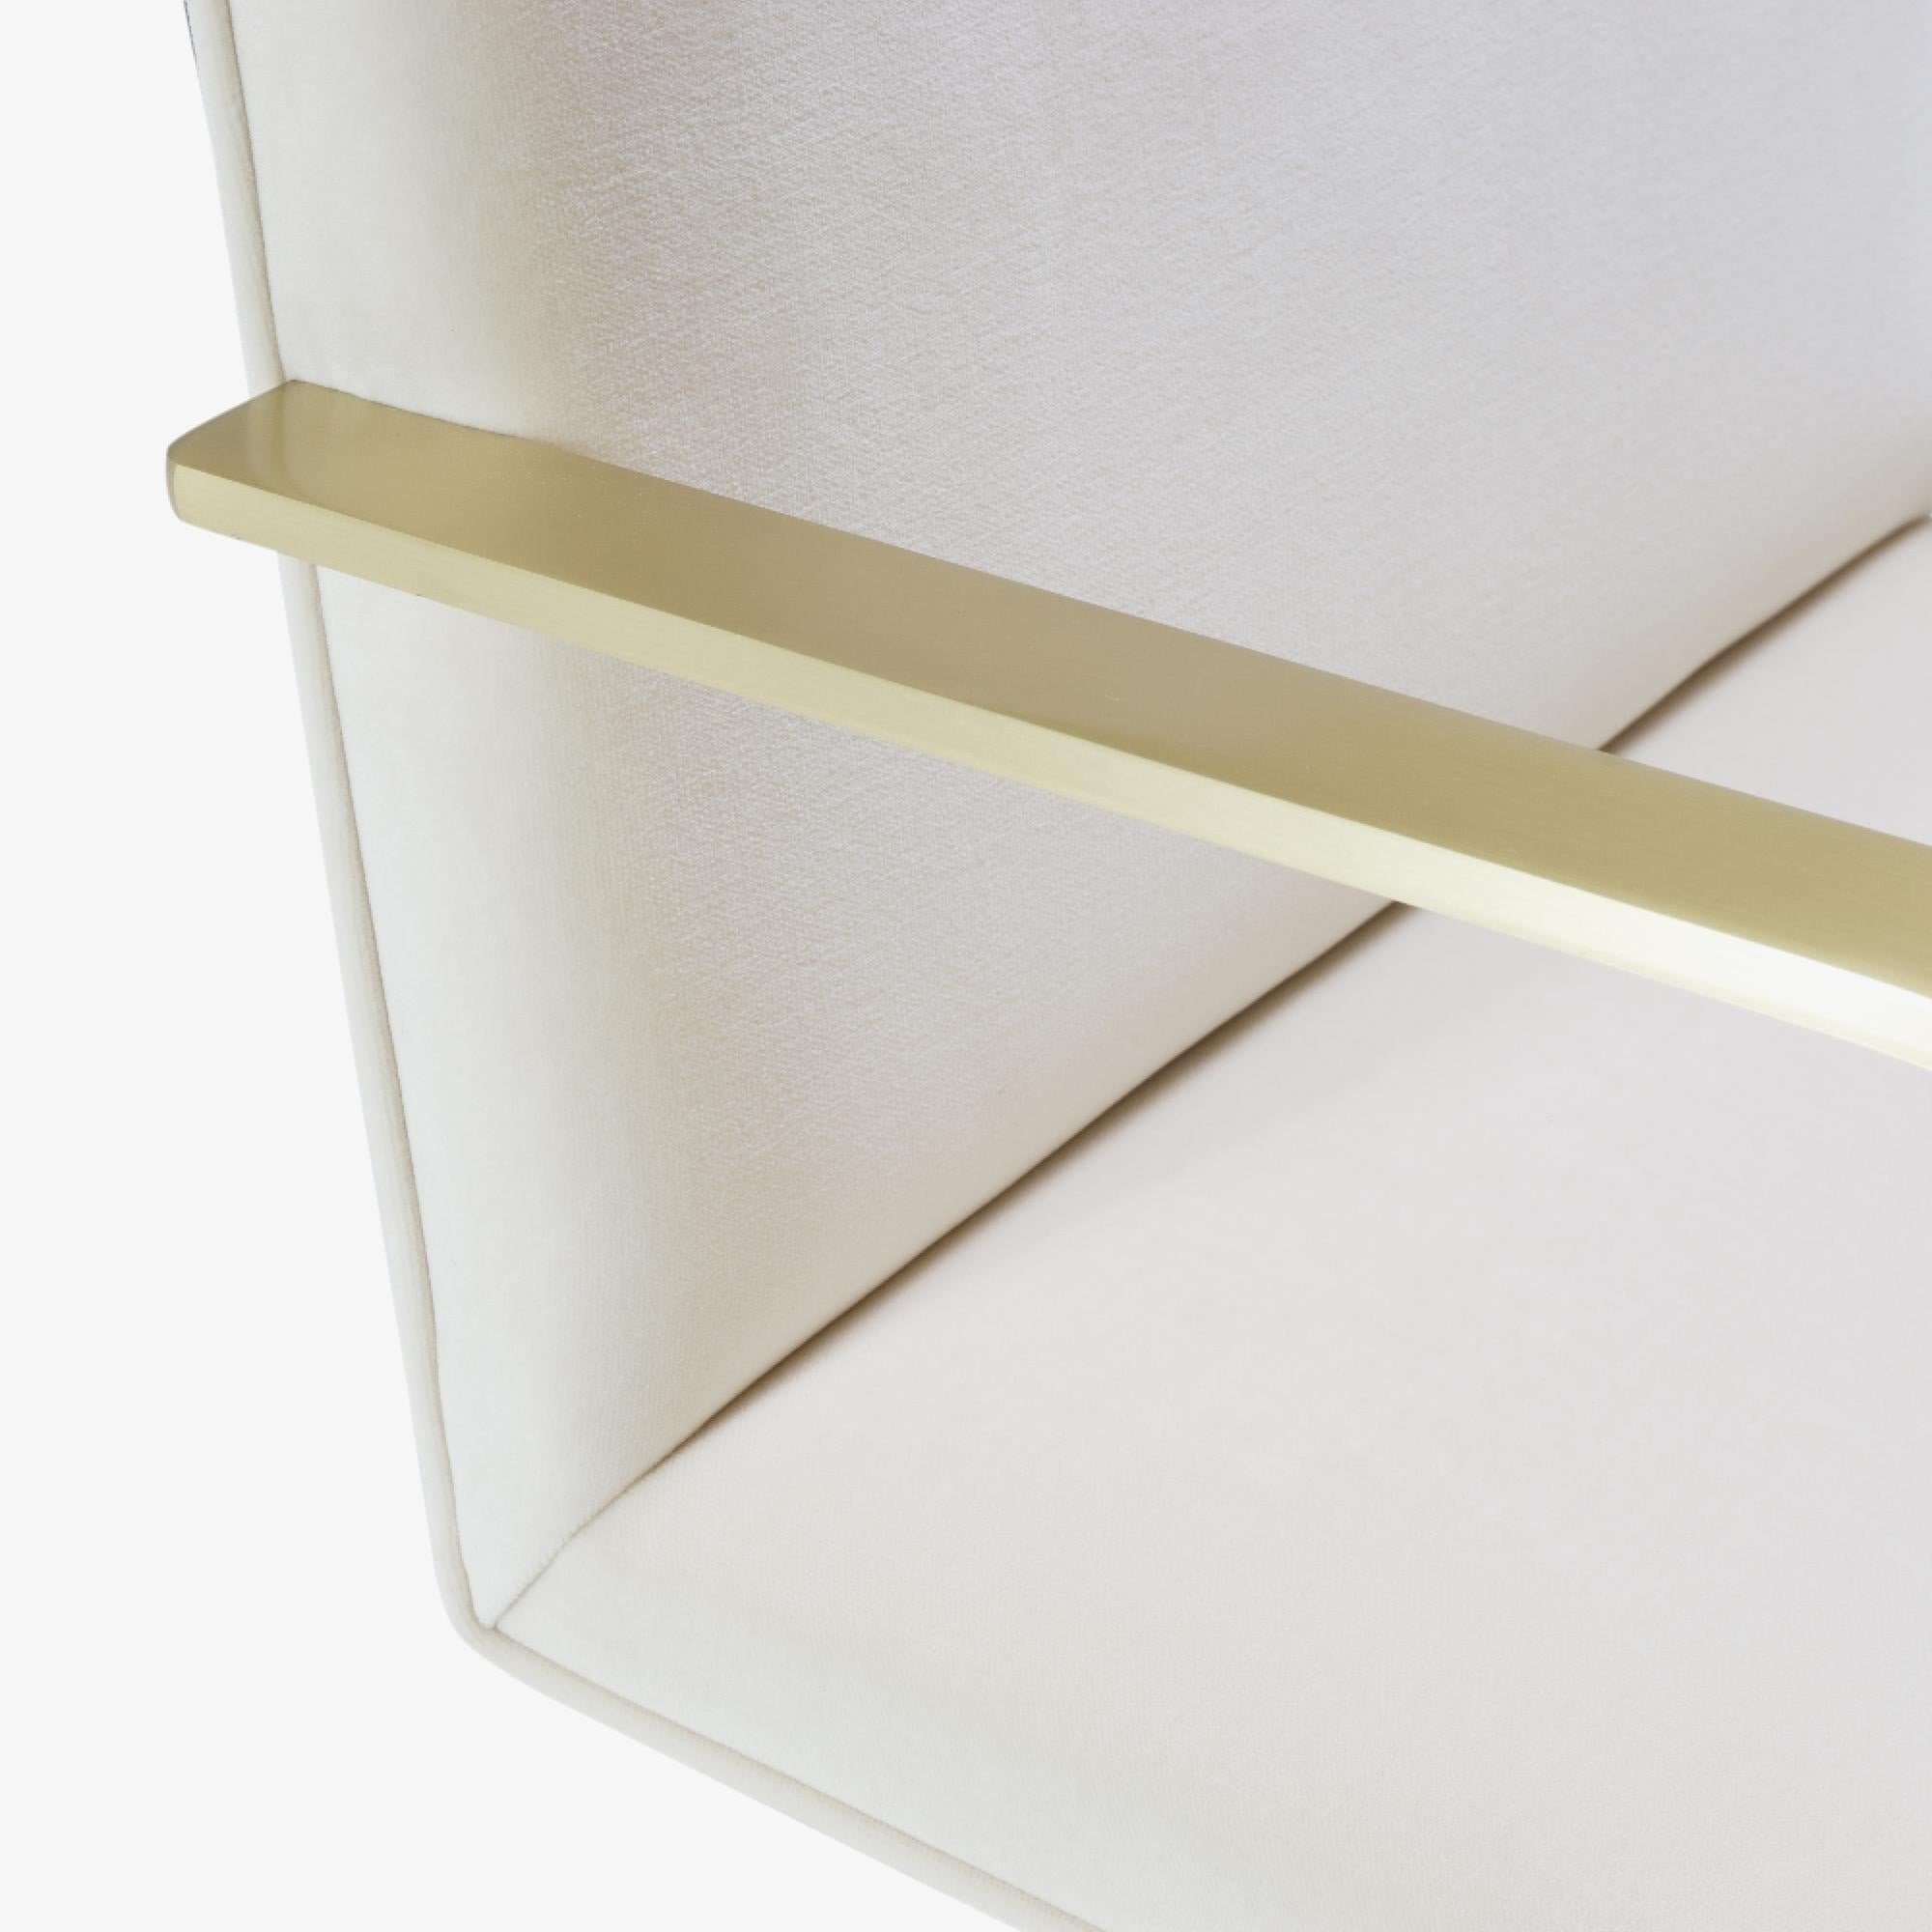 Plated Brno Flat-Bar Chairs in Velvet, Brushed Brass by Mies van der Rohe for Knoll For Sale